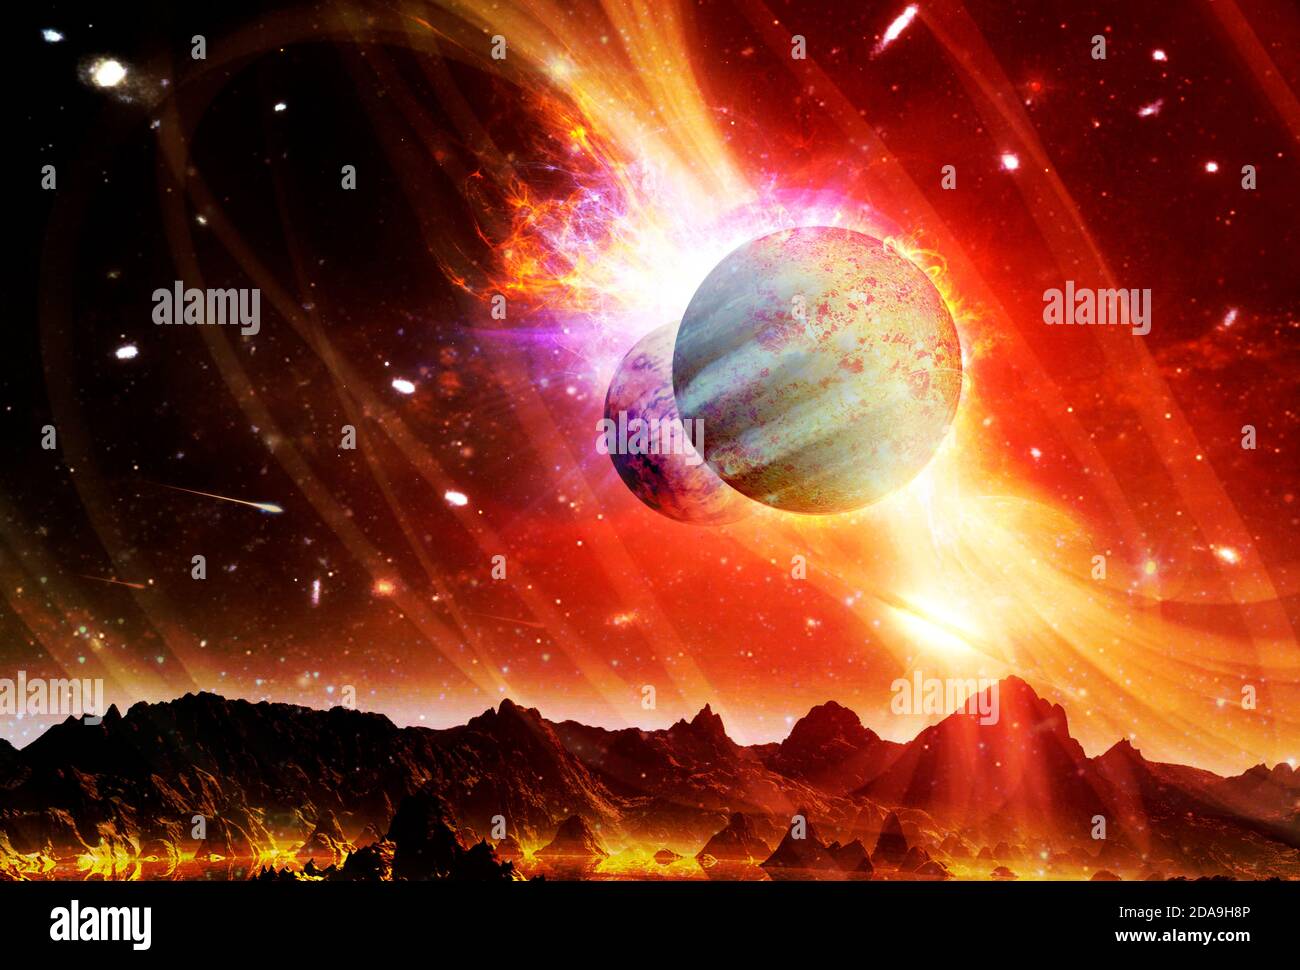 Fantasy landscape of alien planet. Sci-fi wallpaper. Elements of this image furnished by NASA. Stock Photo